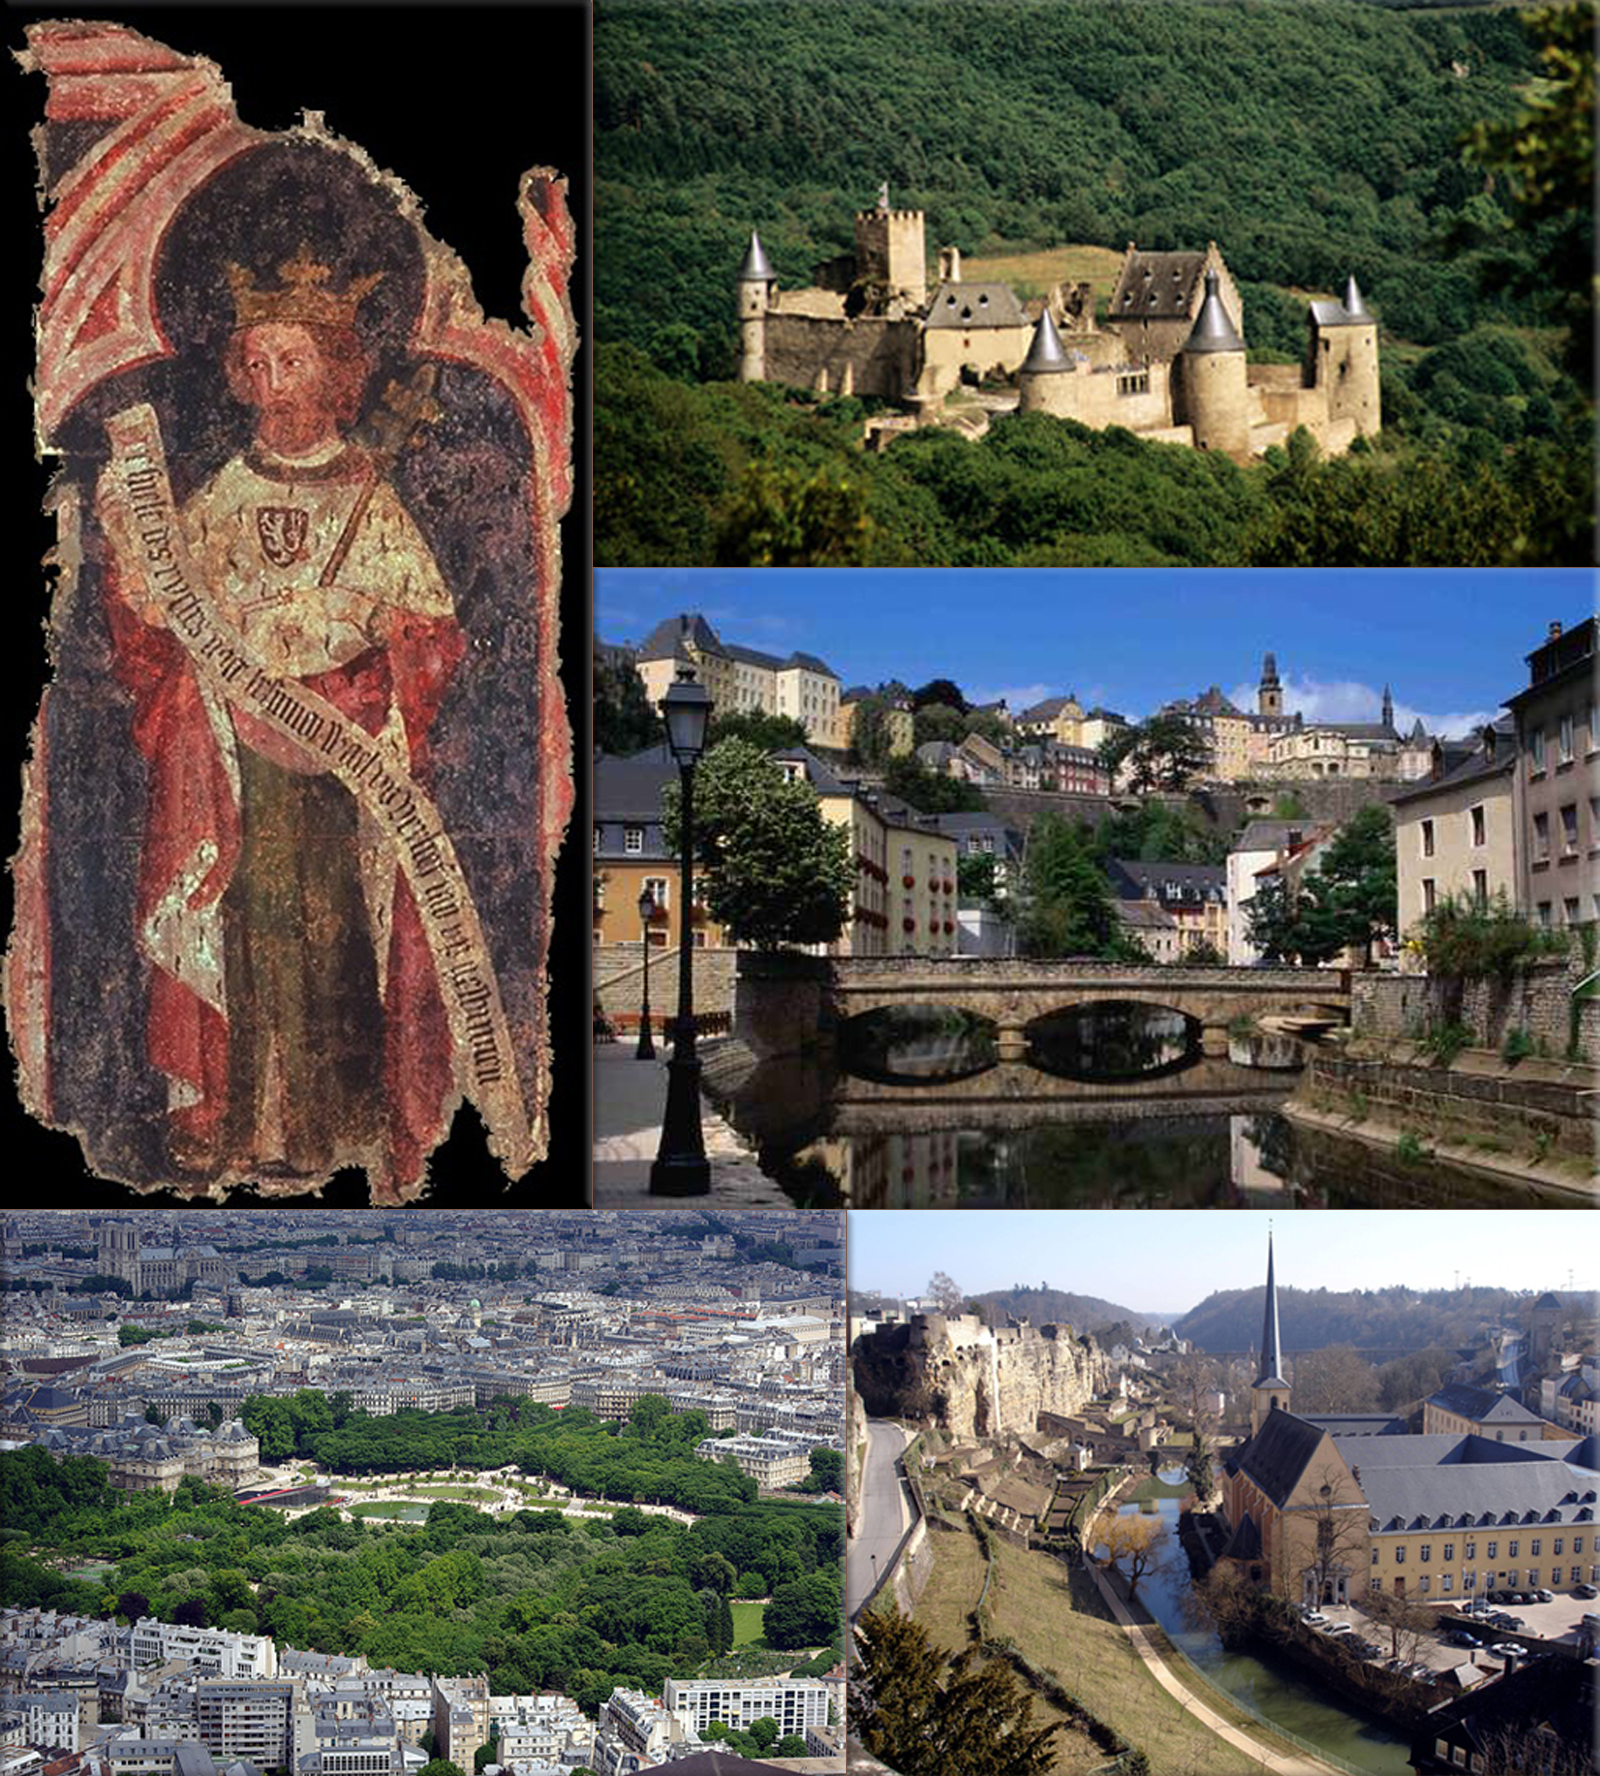 Luxembourg: Charles IV, the 14th century Holy Roman Emperor and king of Bohemia from the House of Luxembourg  ● Castle amongst forested slopes in Luxembourg Ardennes ● Luxembourg ● Luxembourg Old Town